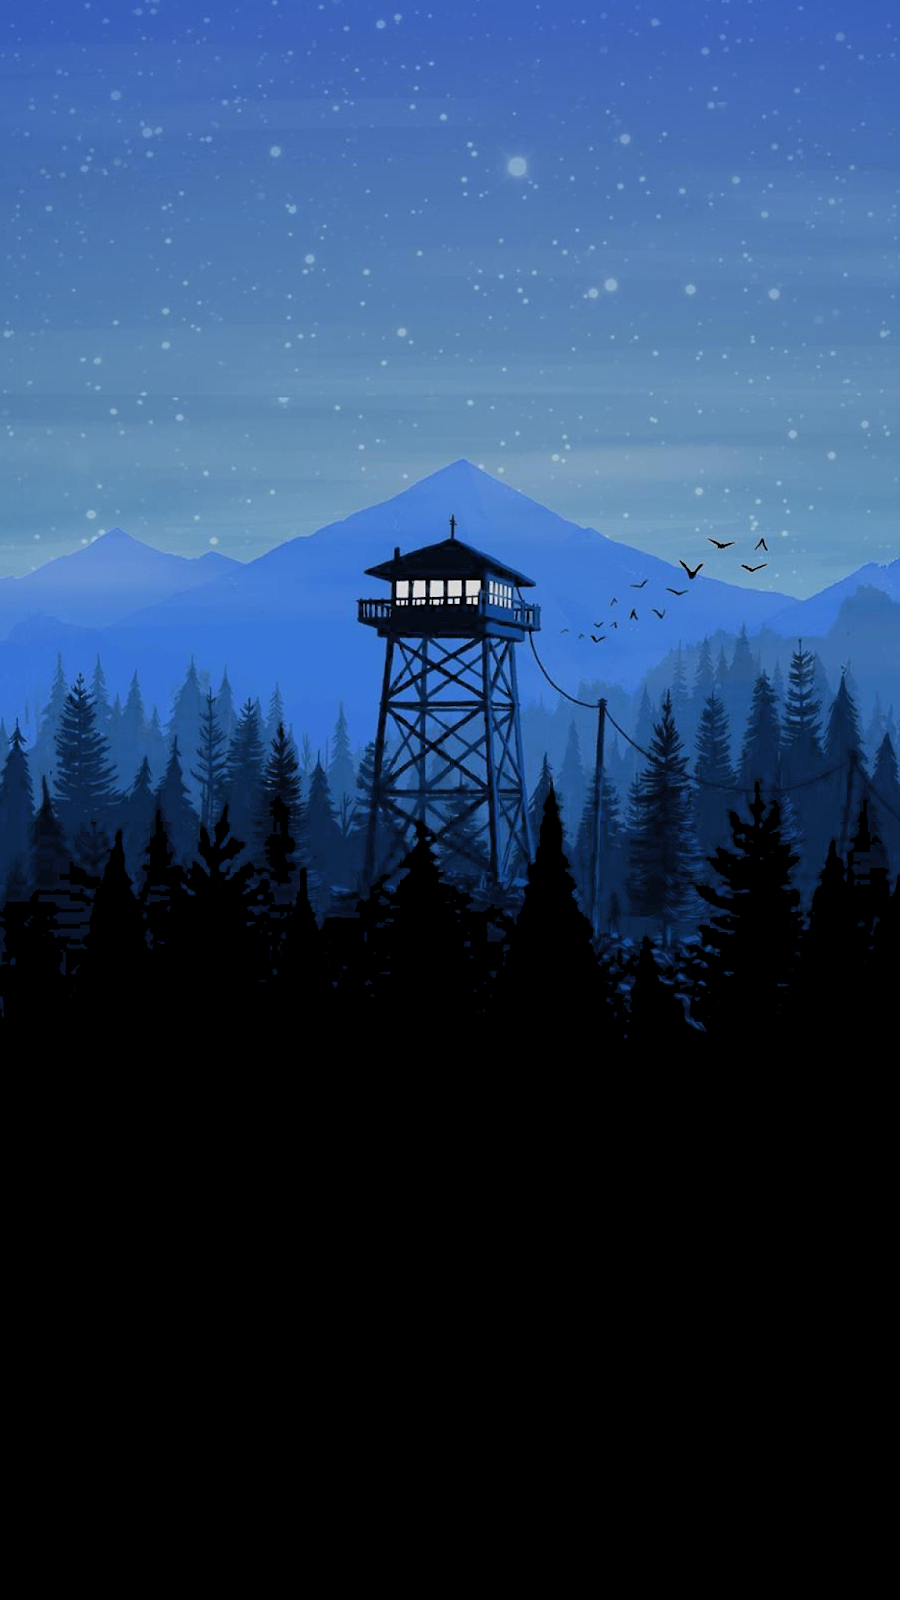 Another Firewatch Wallpaper (for Amoled display)